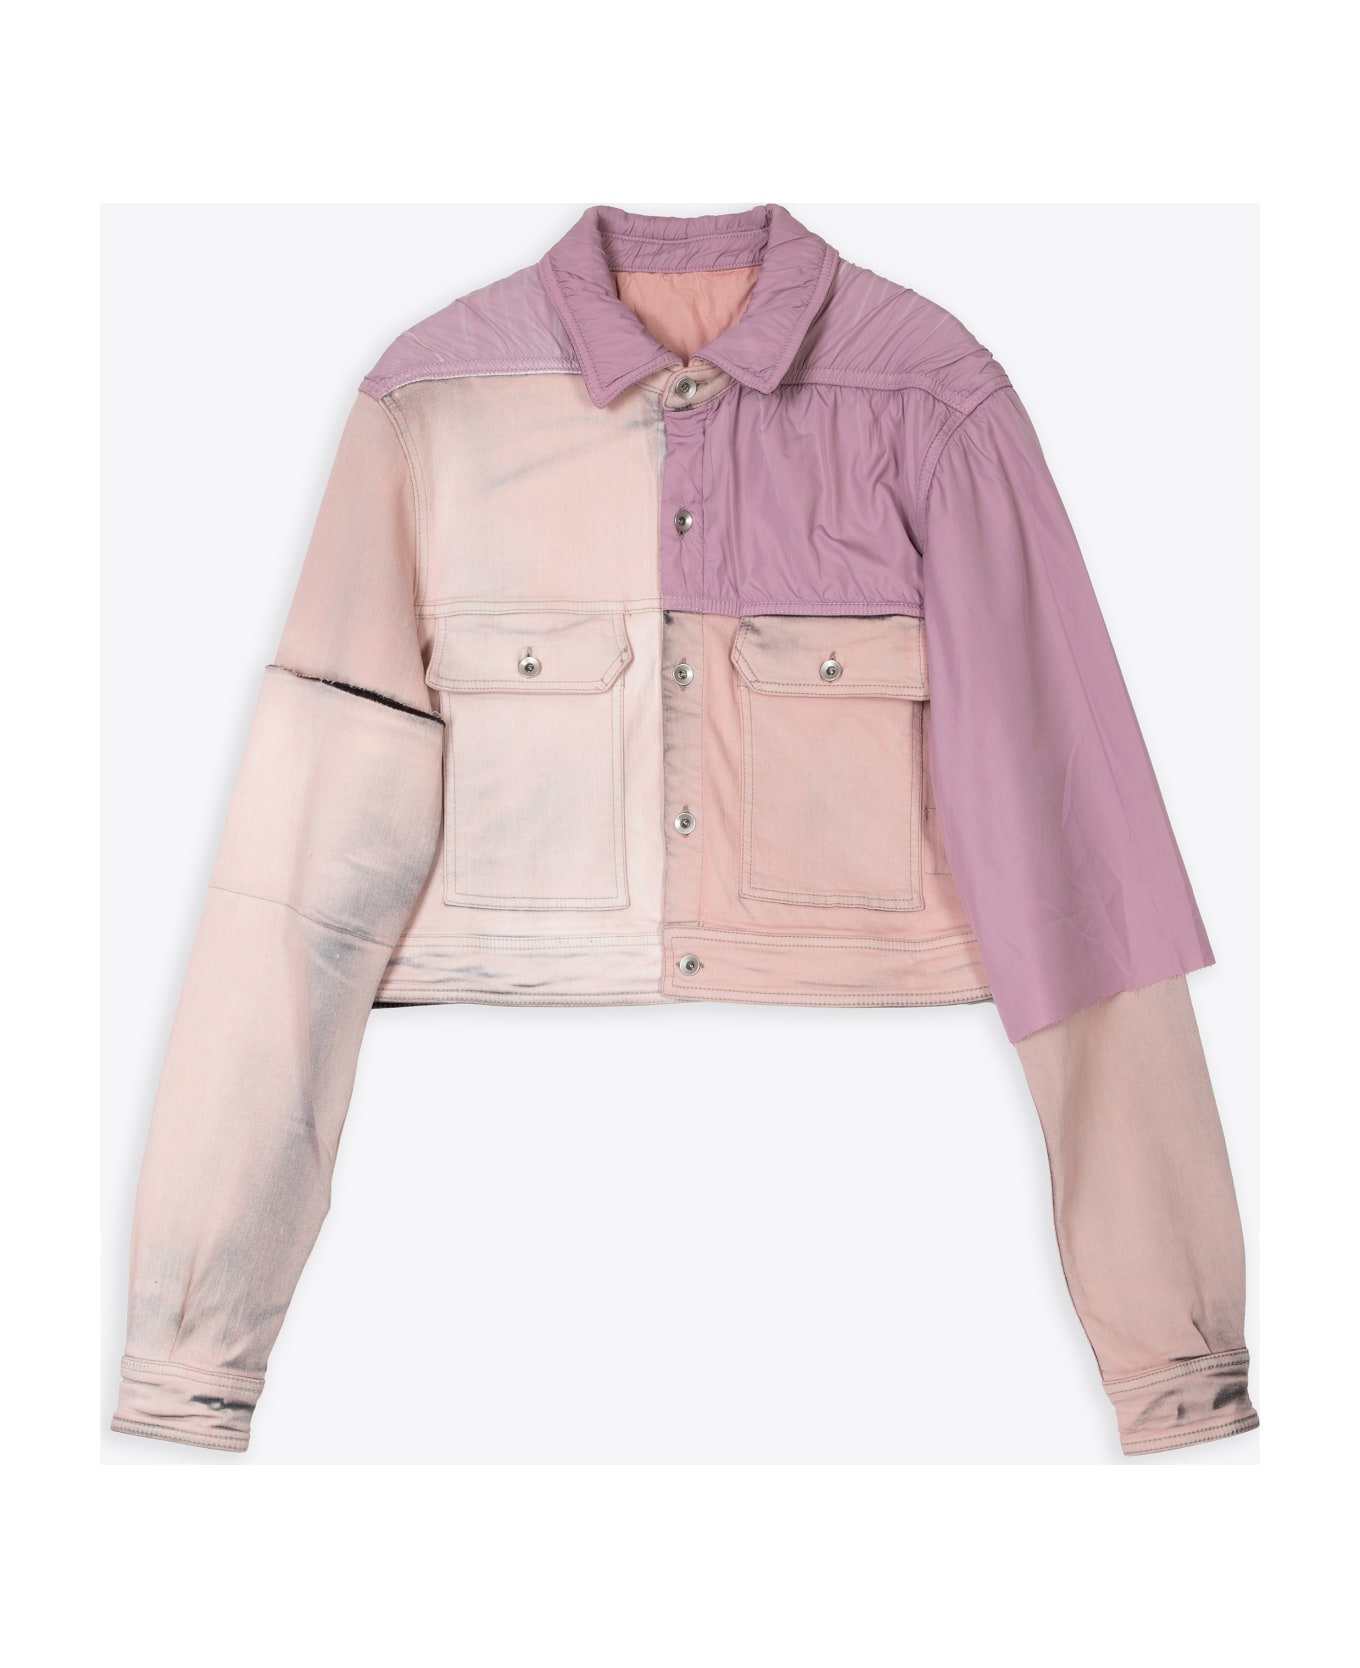 DRKSHDW Cropped Outershirt Faded Pink faded denim patchwork jacket - Cropped outershirt faded - Rosa